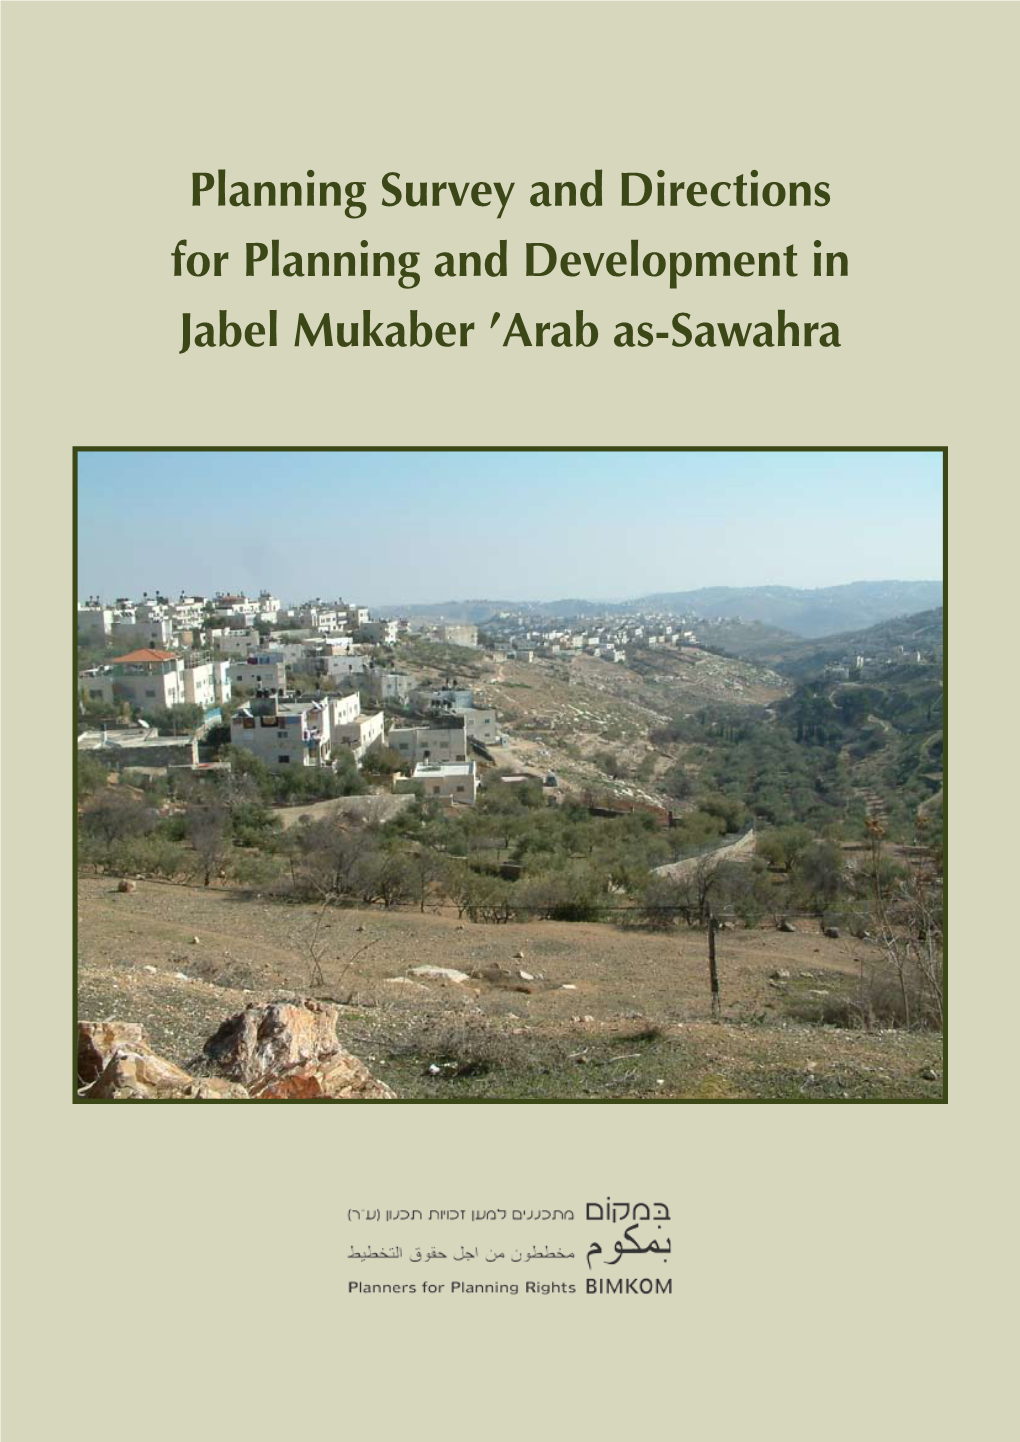 Planning Survey and Directions for Planning and Development in Jabel Mukaber ’Arab As-Sawahra